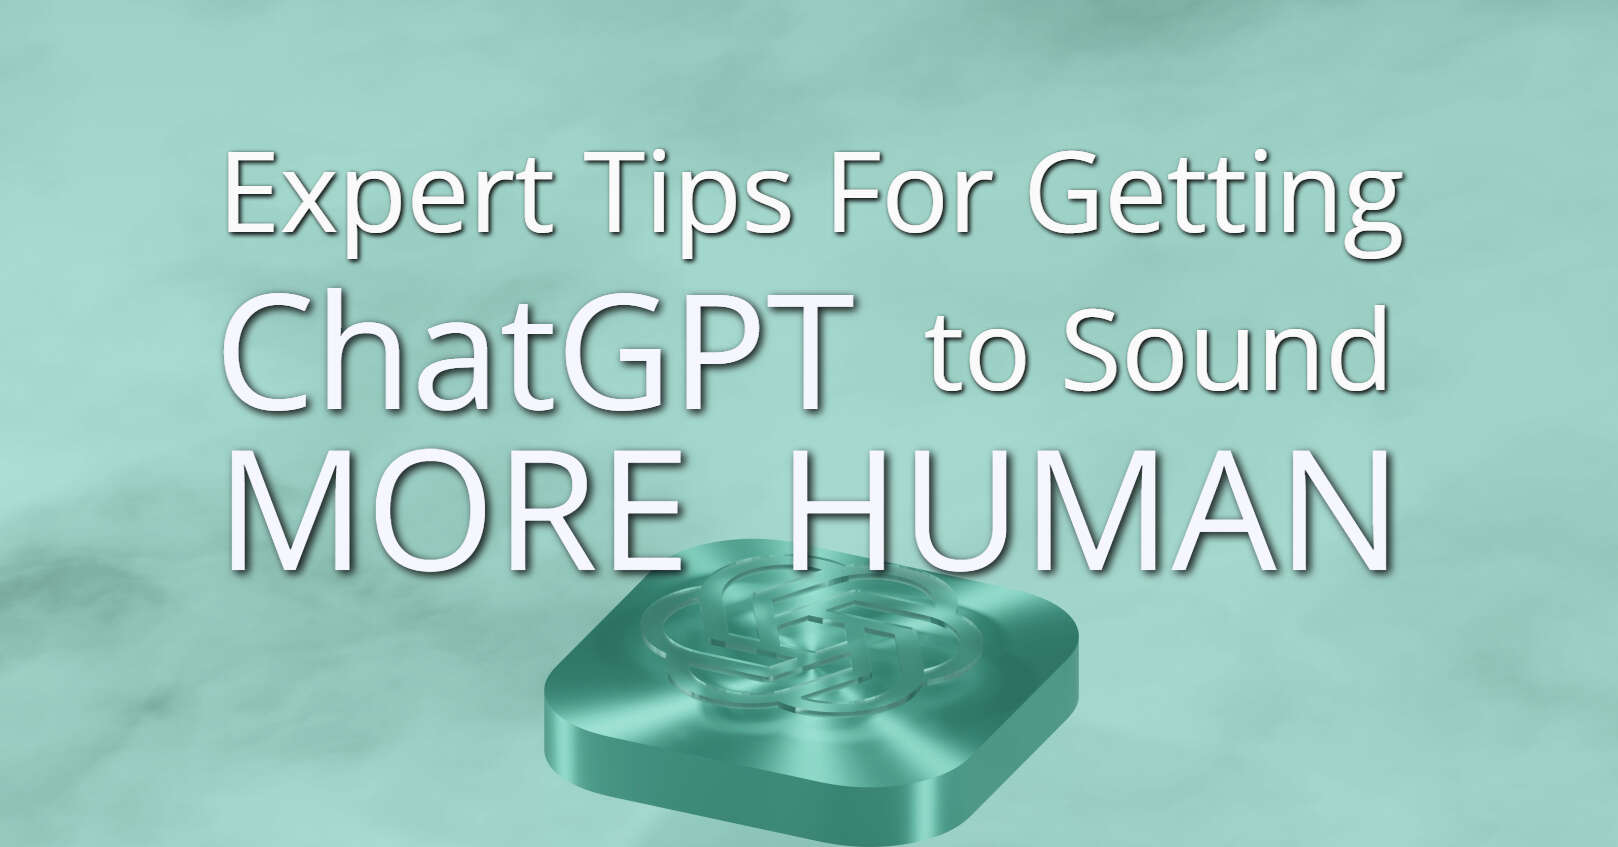 Expert Tips For Getting ChatGPT to Sound More Human to Sound